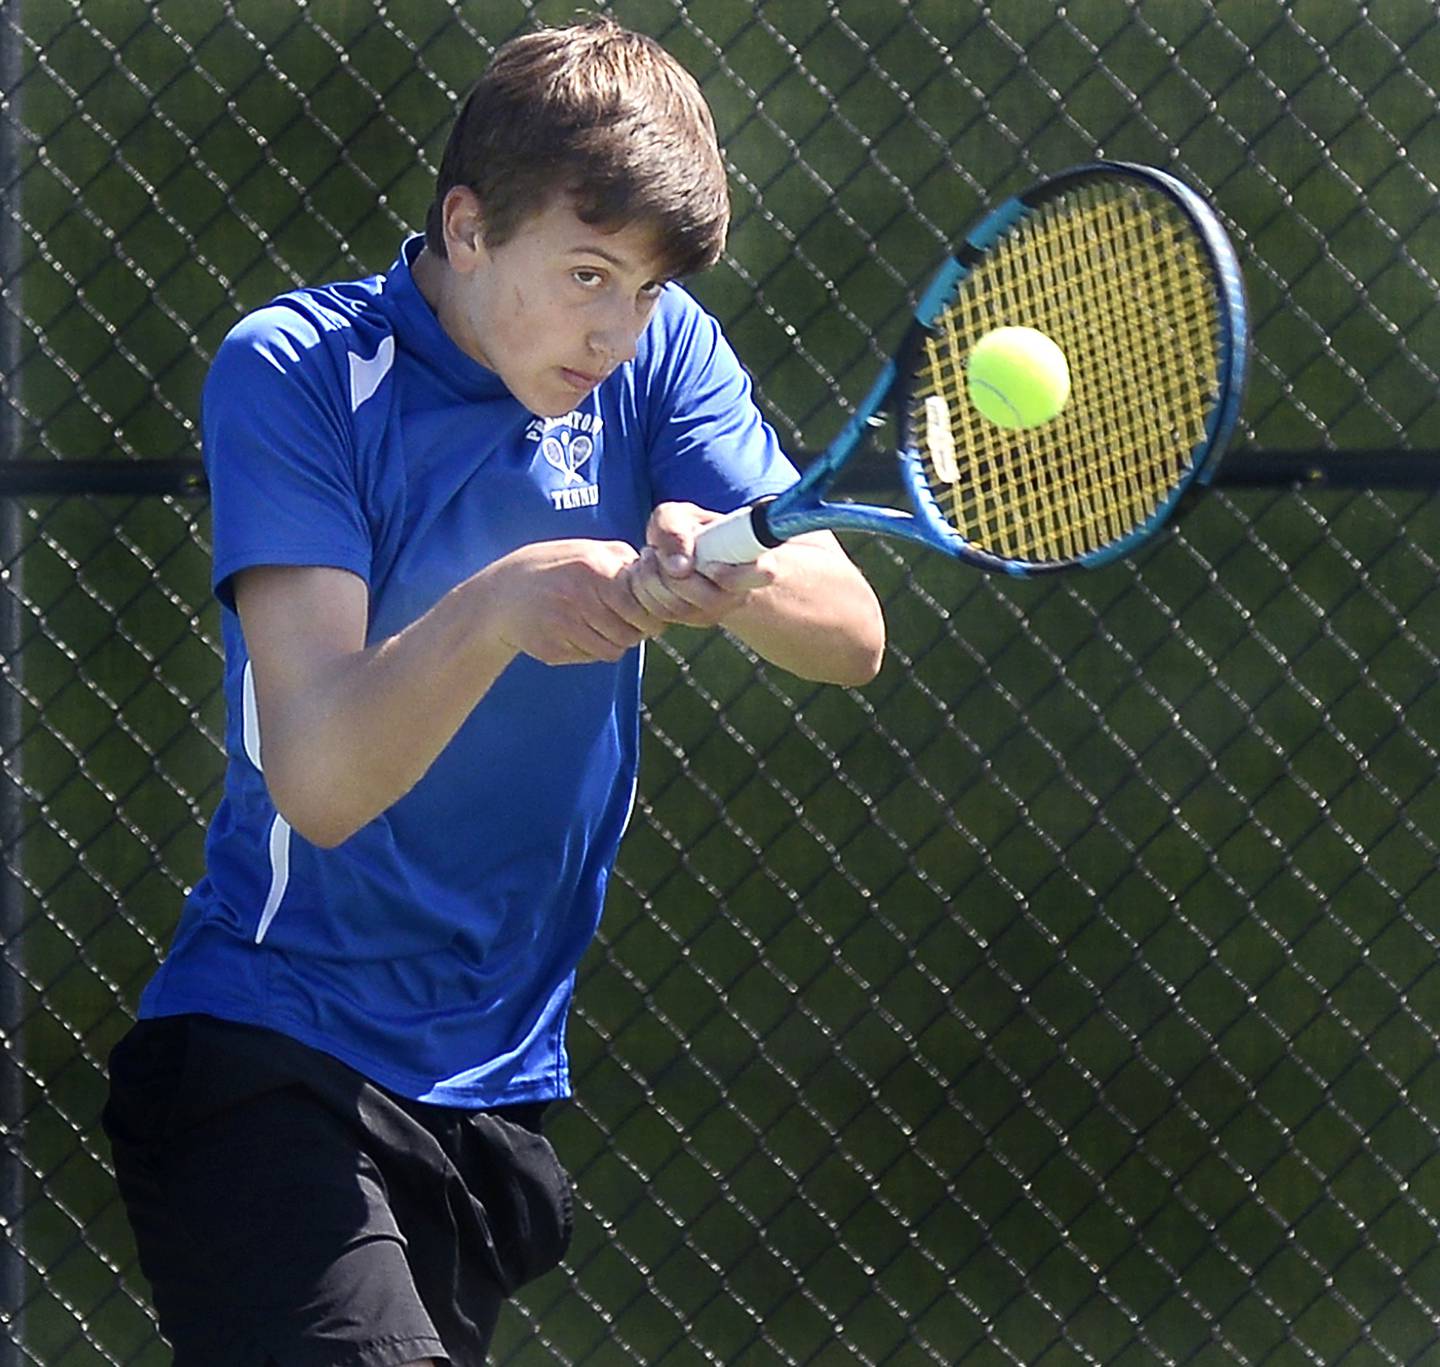 Princeton’s Tyson Phillips competes in a singles match during the Class 1A Ottawa Boys Tennis Sectional on Monday, May 23, 2022, at Ottawa.